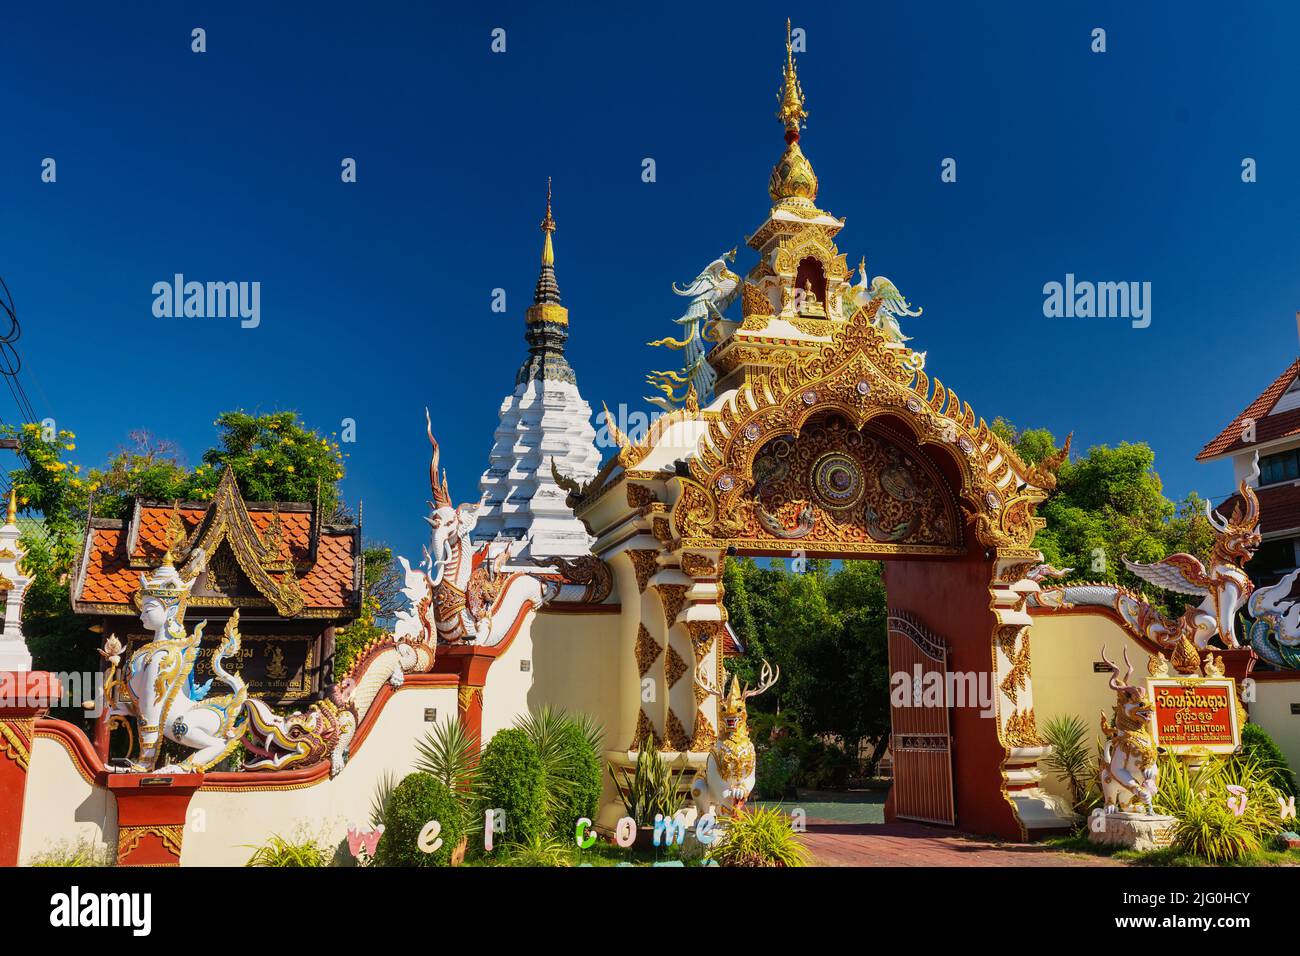 Entrance of the colorful wat muen tum temple in Chiang Mai, Thailand Stock Photo